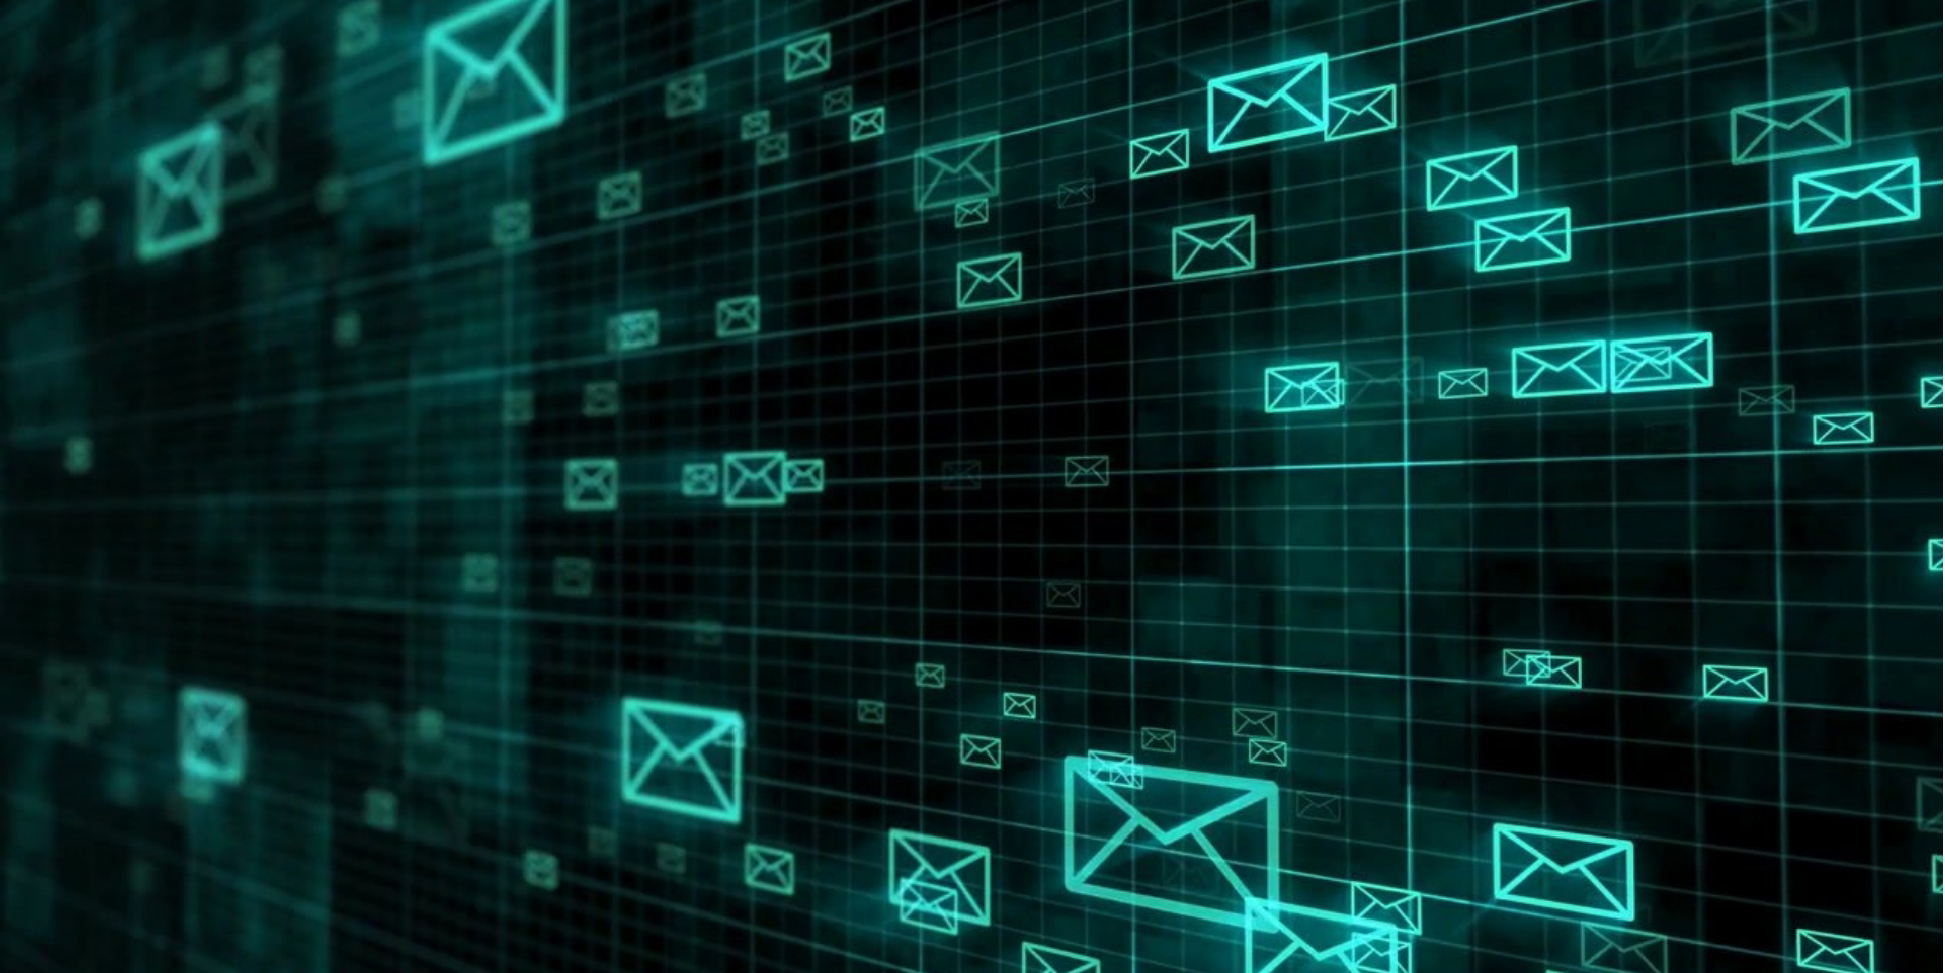 Email Security for Your Business: SPF, DKIM, DMARC Explained